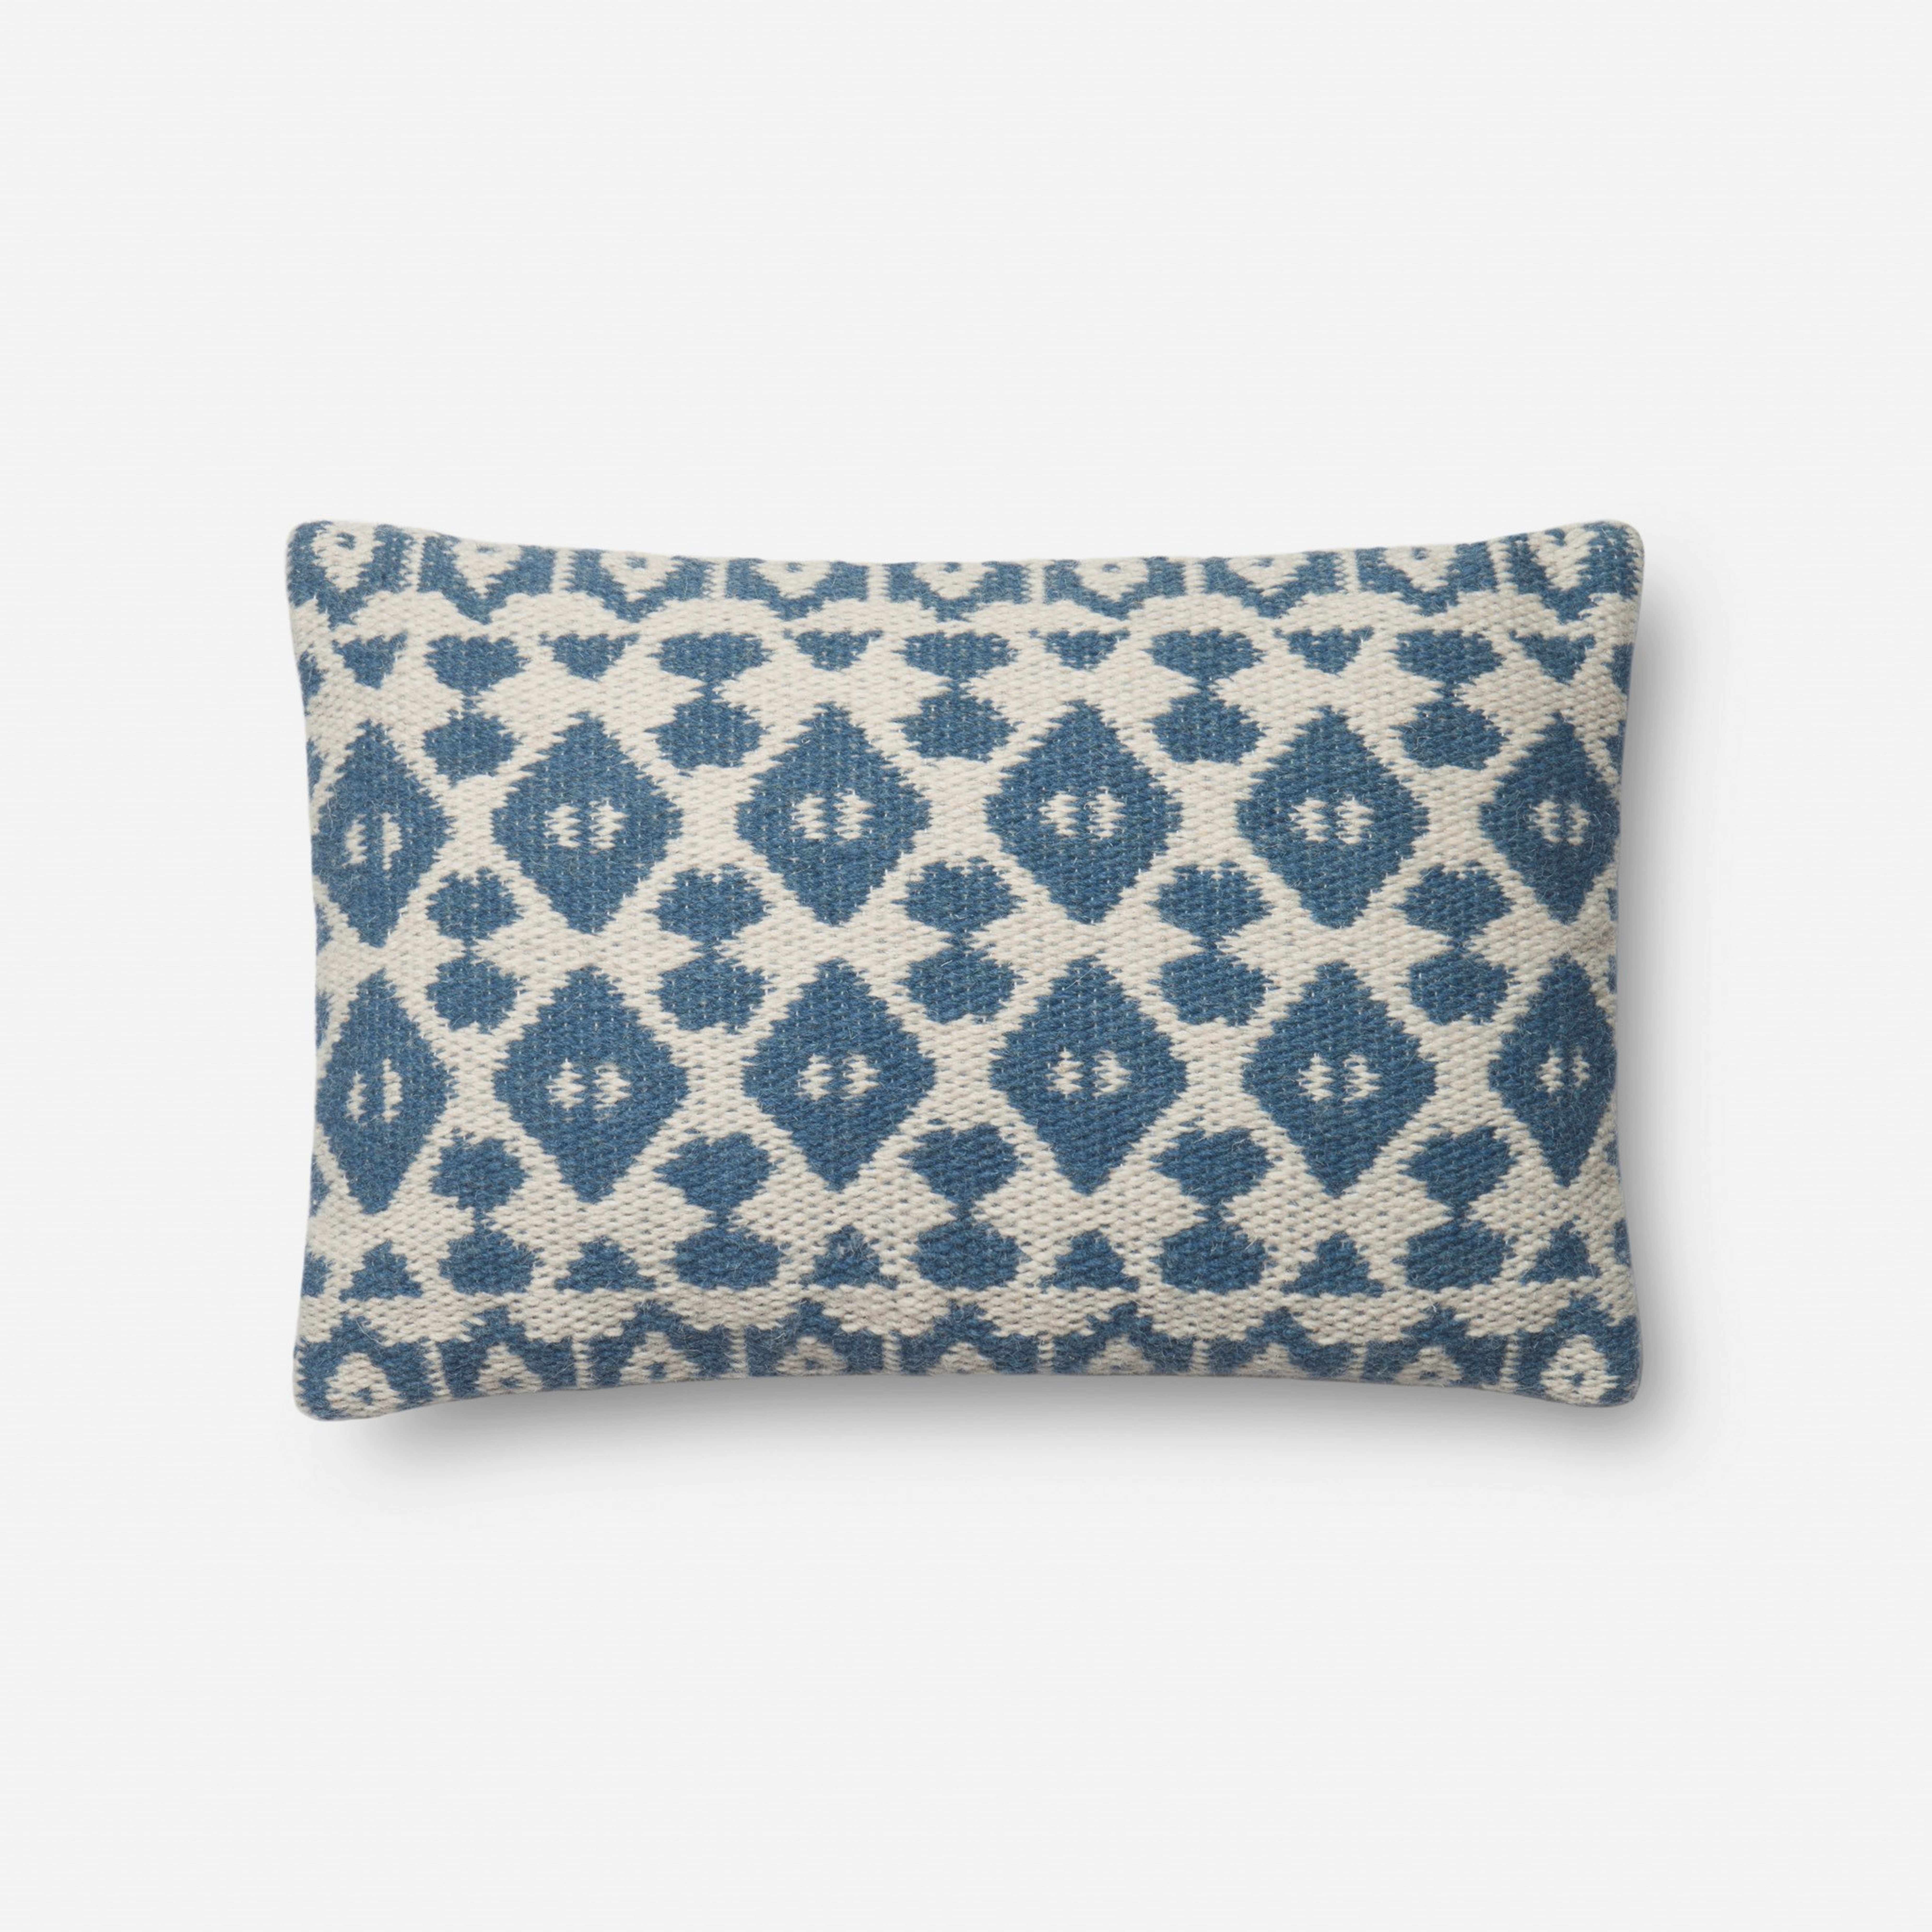 PILLOWS - NAVY / IVORY - Magnolia Home by Joana Gaines Crafted by Loloi Rugs